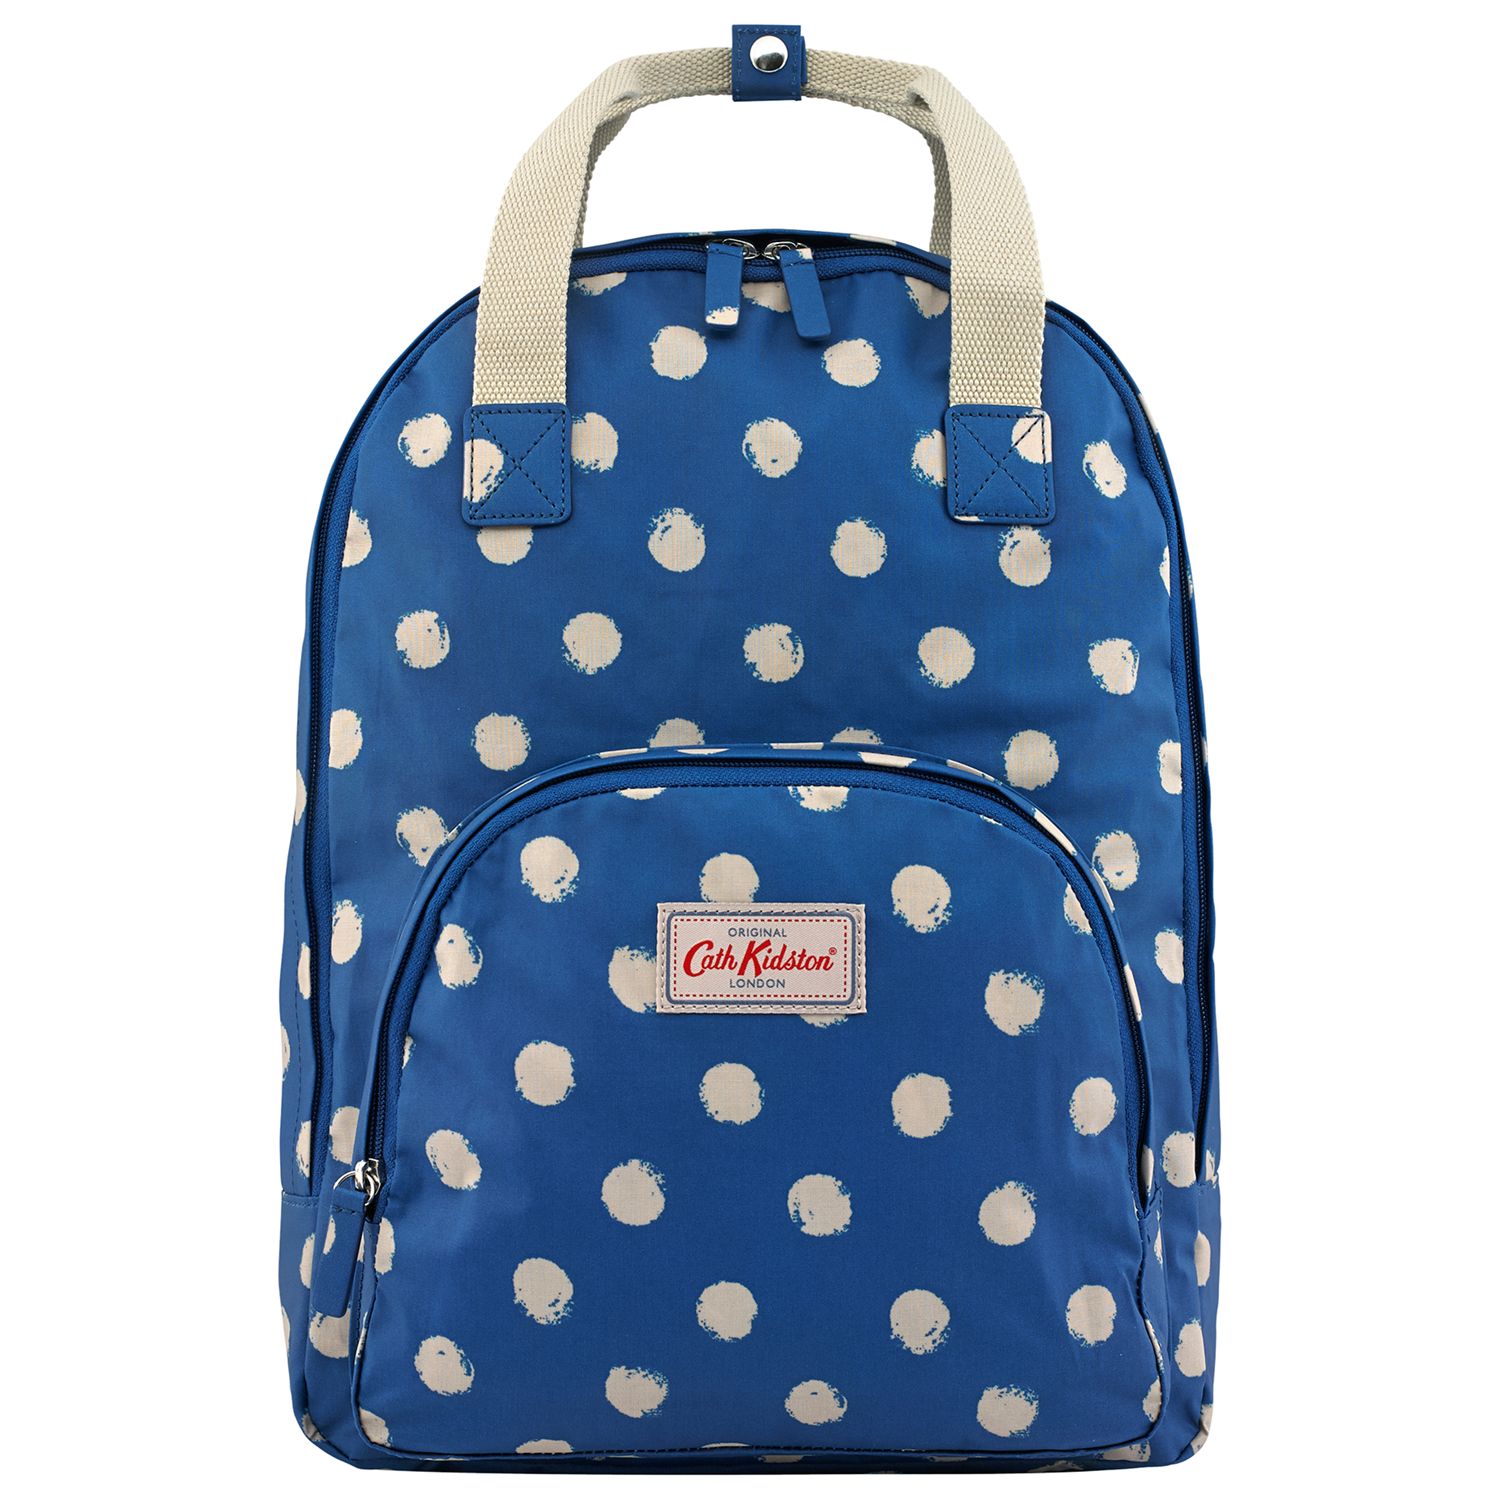 Cath Kidston Smudge Spot Backpack 